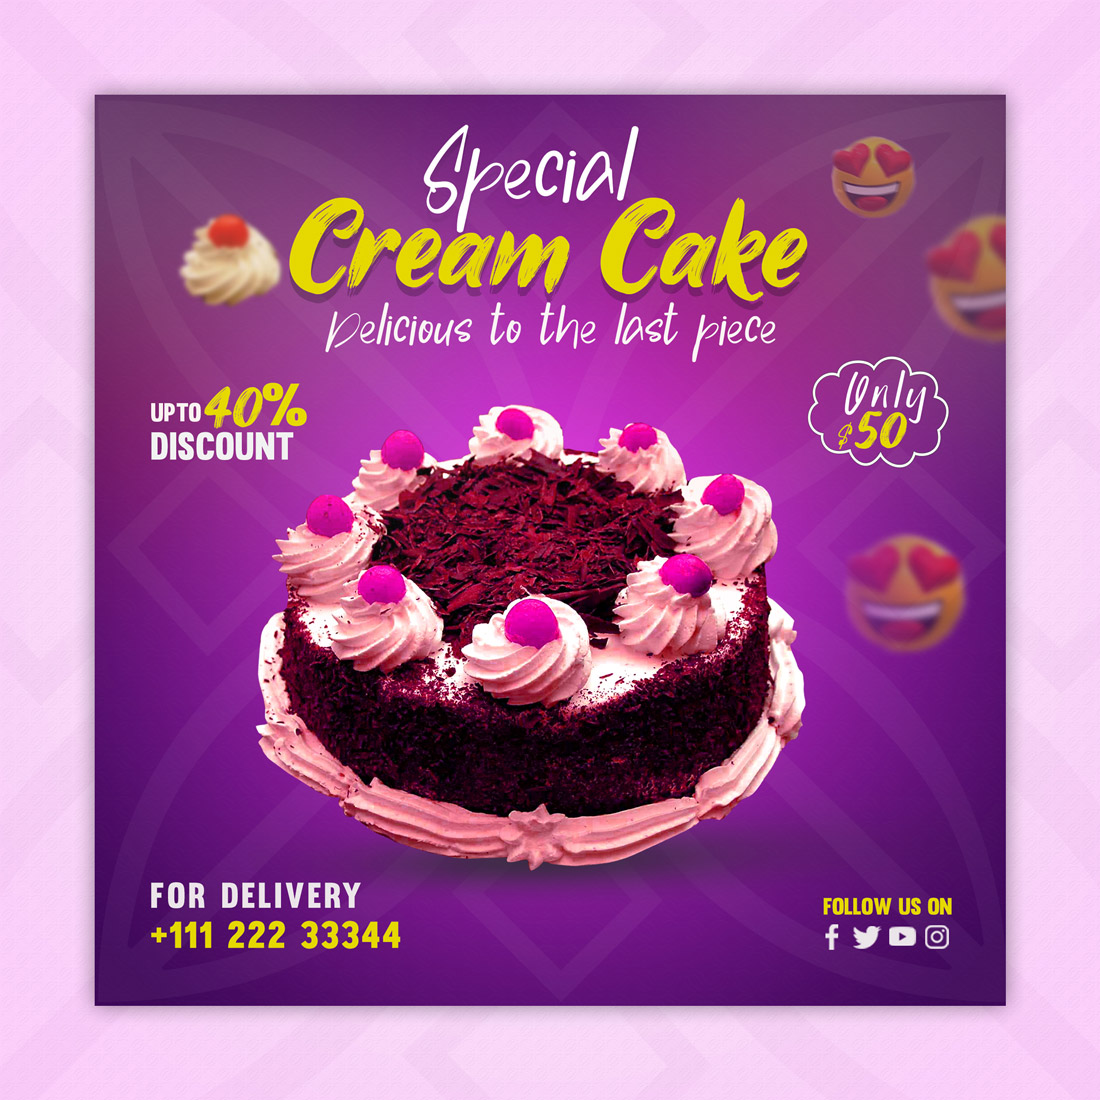 Flyer for a cake shop with a picture of a cake.